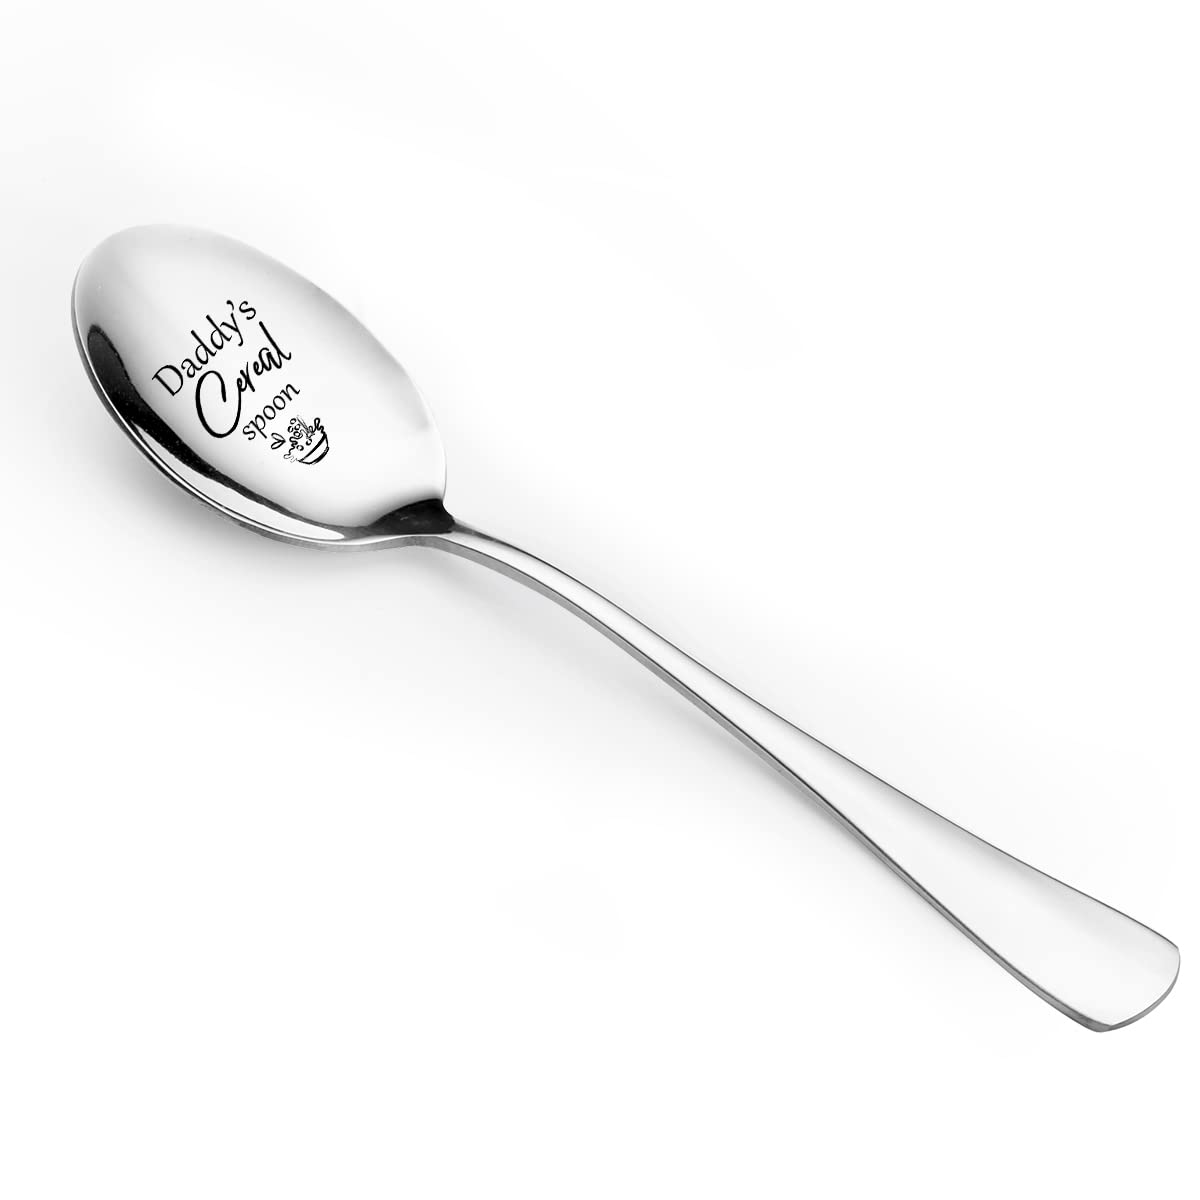 Best Dad Gifts - Daddy's Cereal Spoon - Funny Dad Cereal Spoon Engraved Stainless Steel - Dad Gift from Daughter Son - Father's Day/Birthday/Christmas Gifts